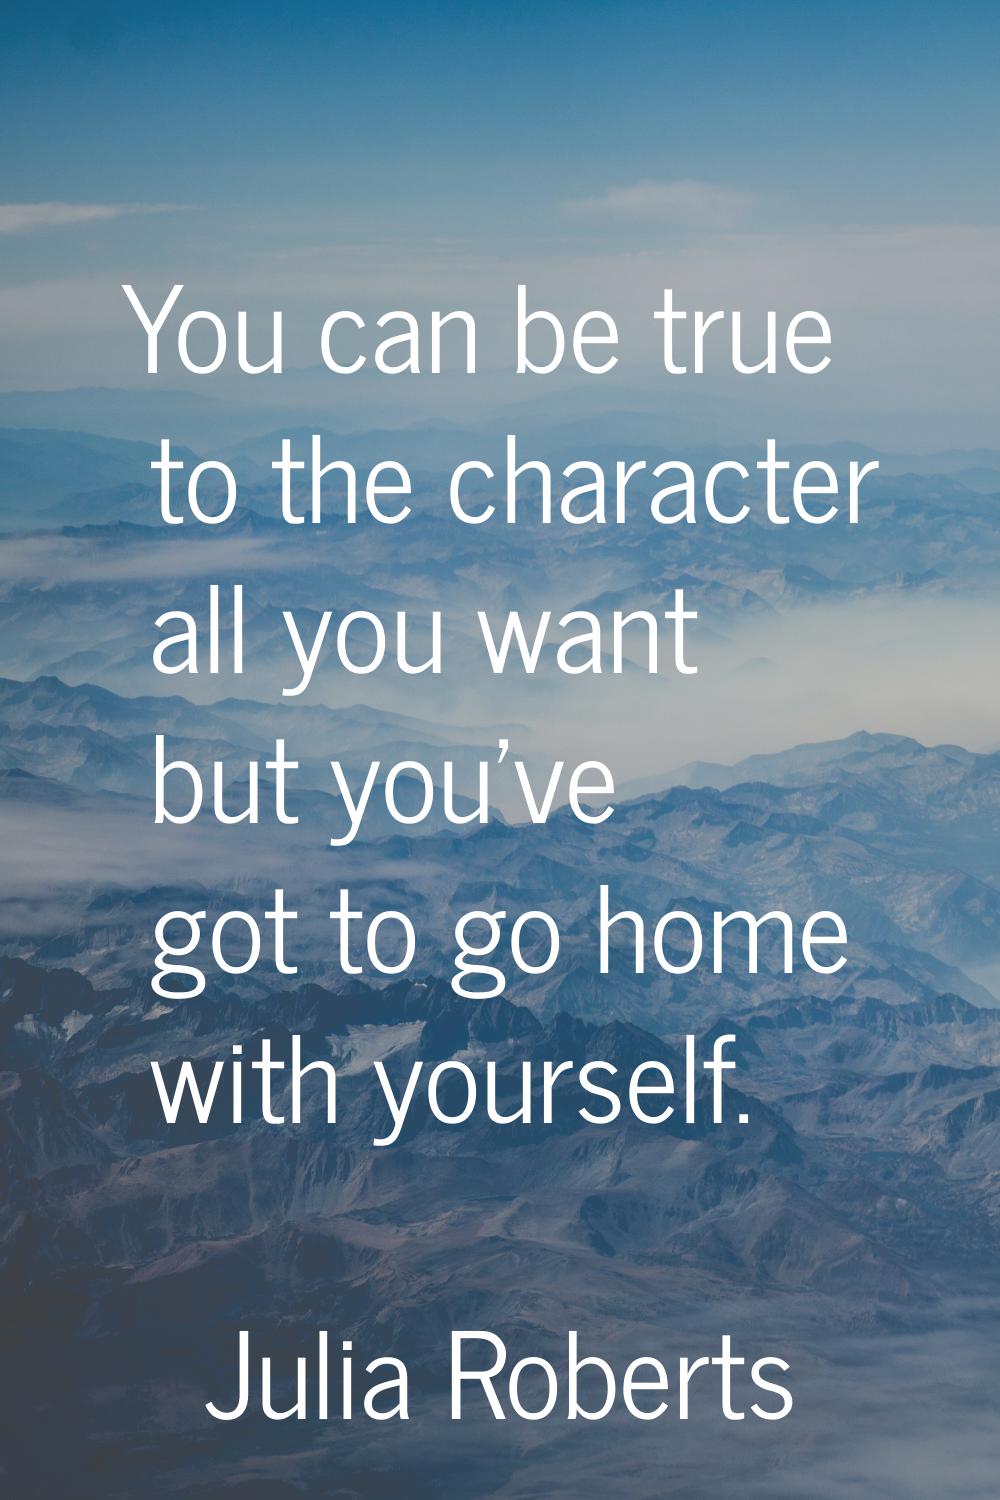 You can be true to the character all you want but you've got to go home with yourself.